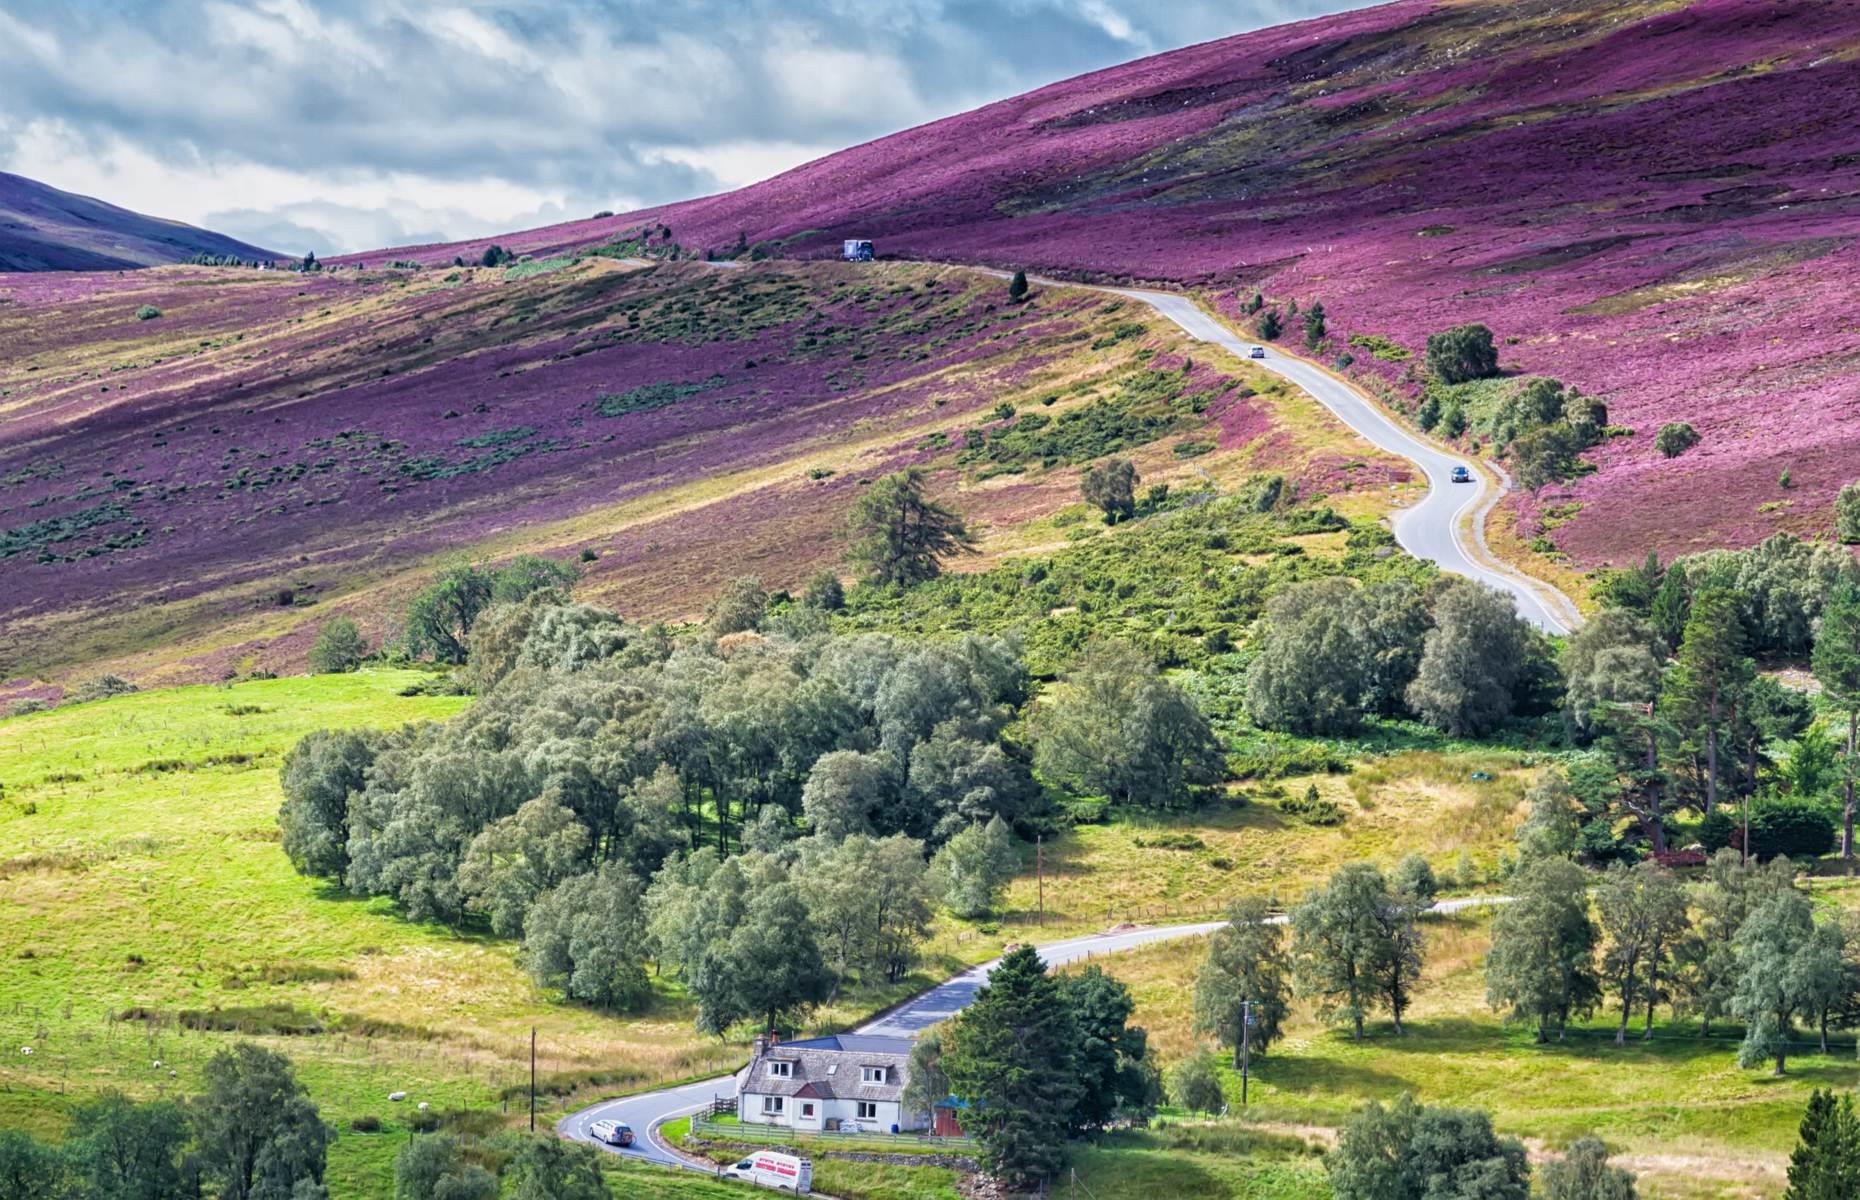 <p>Traversing Britain’s highest public road, the <a href="https://www.loveexploring.com/guides/72685/the-snow-roads-scenic-route-the-ultimate-scotland-road-trip">Snow Roads Scenic Route</a> journeys 90 miles (145km) through the beautiful Cairngorms National Park in the Scottish Highlands. The journey begins near the pretty market village of Blairgowrie, passing the towns of Braemar and Ballater before ending at Grantown-on-Spey, on the northern edge of the mountains. The scenic route slices through hills dotted with crumbling castles, rugged mountains and plenty of jaw-dropping scenery. Discover more of <a href="https://www.loveexploring.com/galleries/97761/the-uks-most-stunning-national-parks?page=1">the UK's most stunning national parks here</a>.</p>